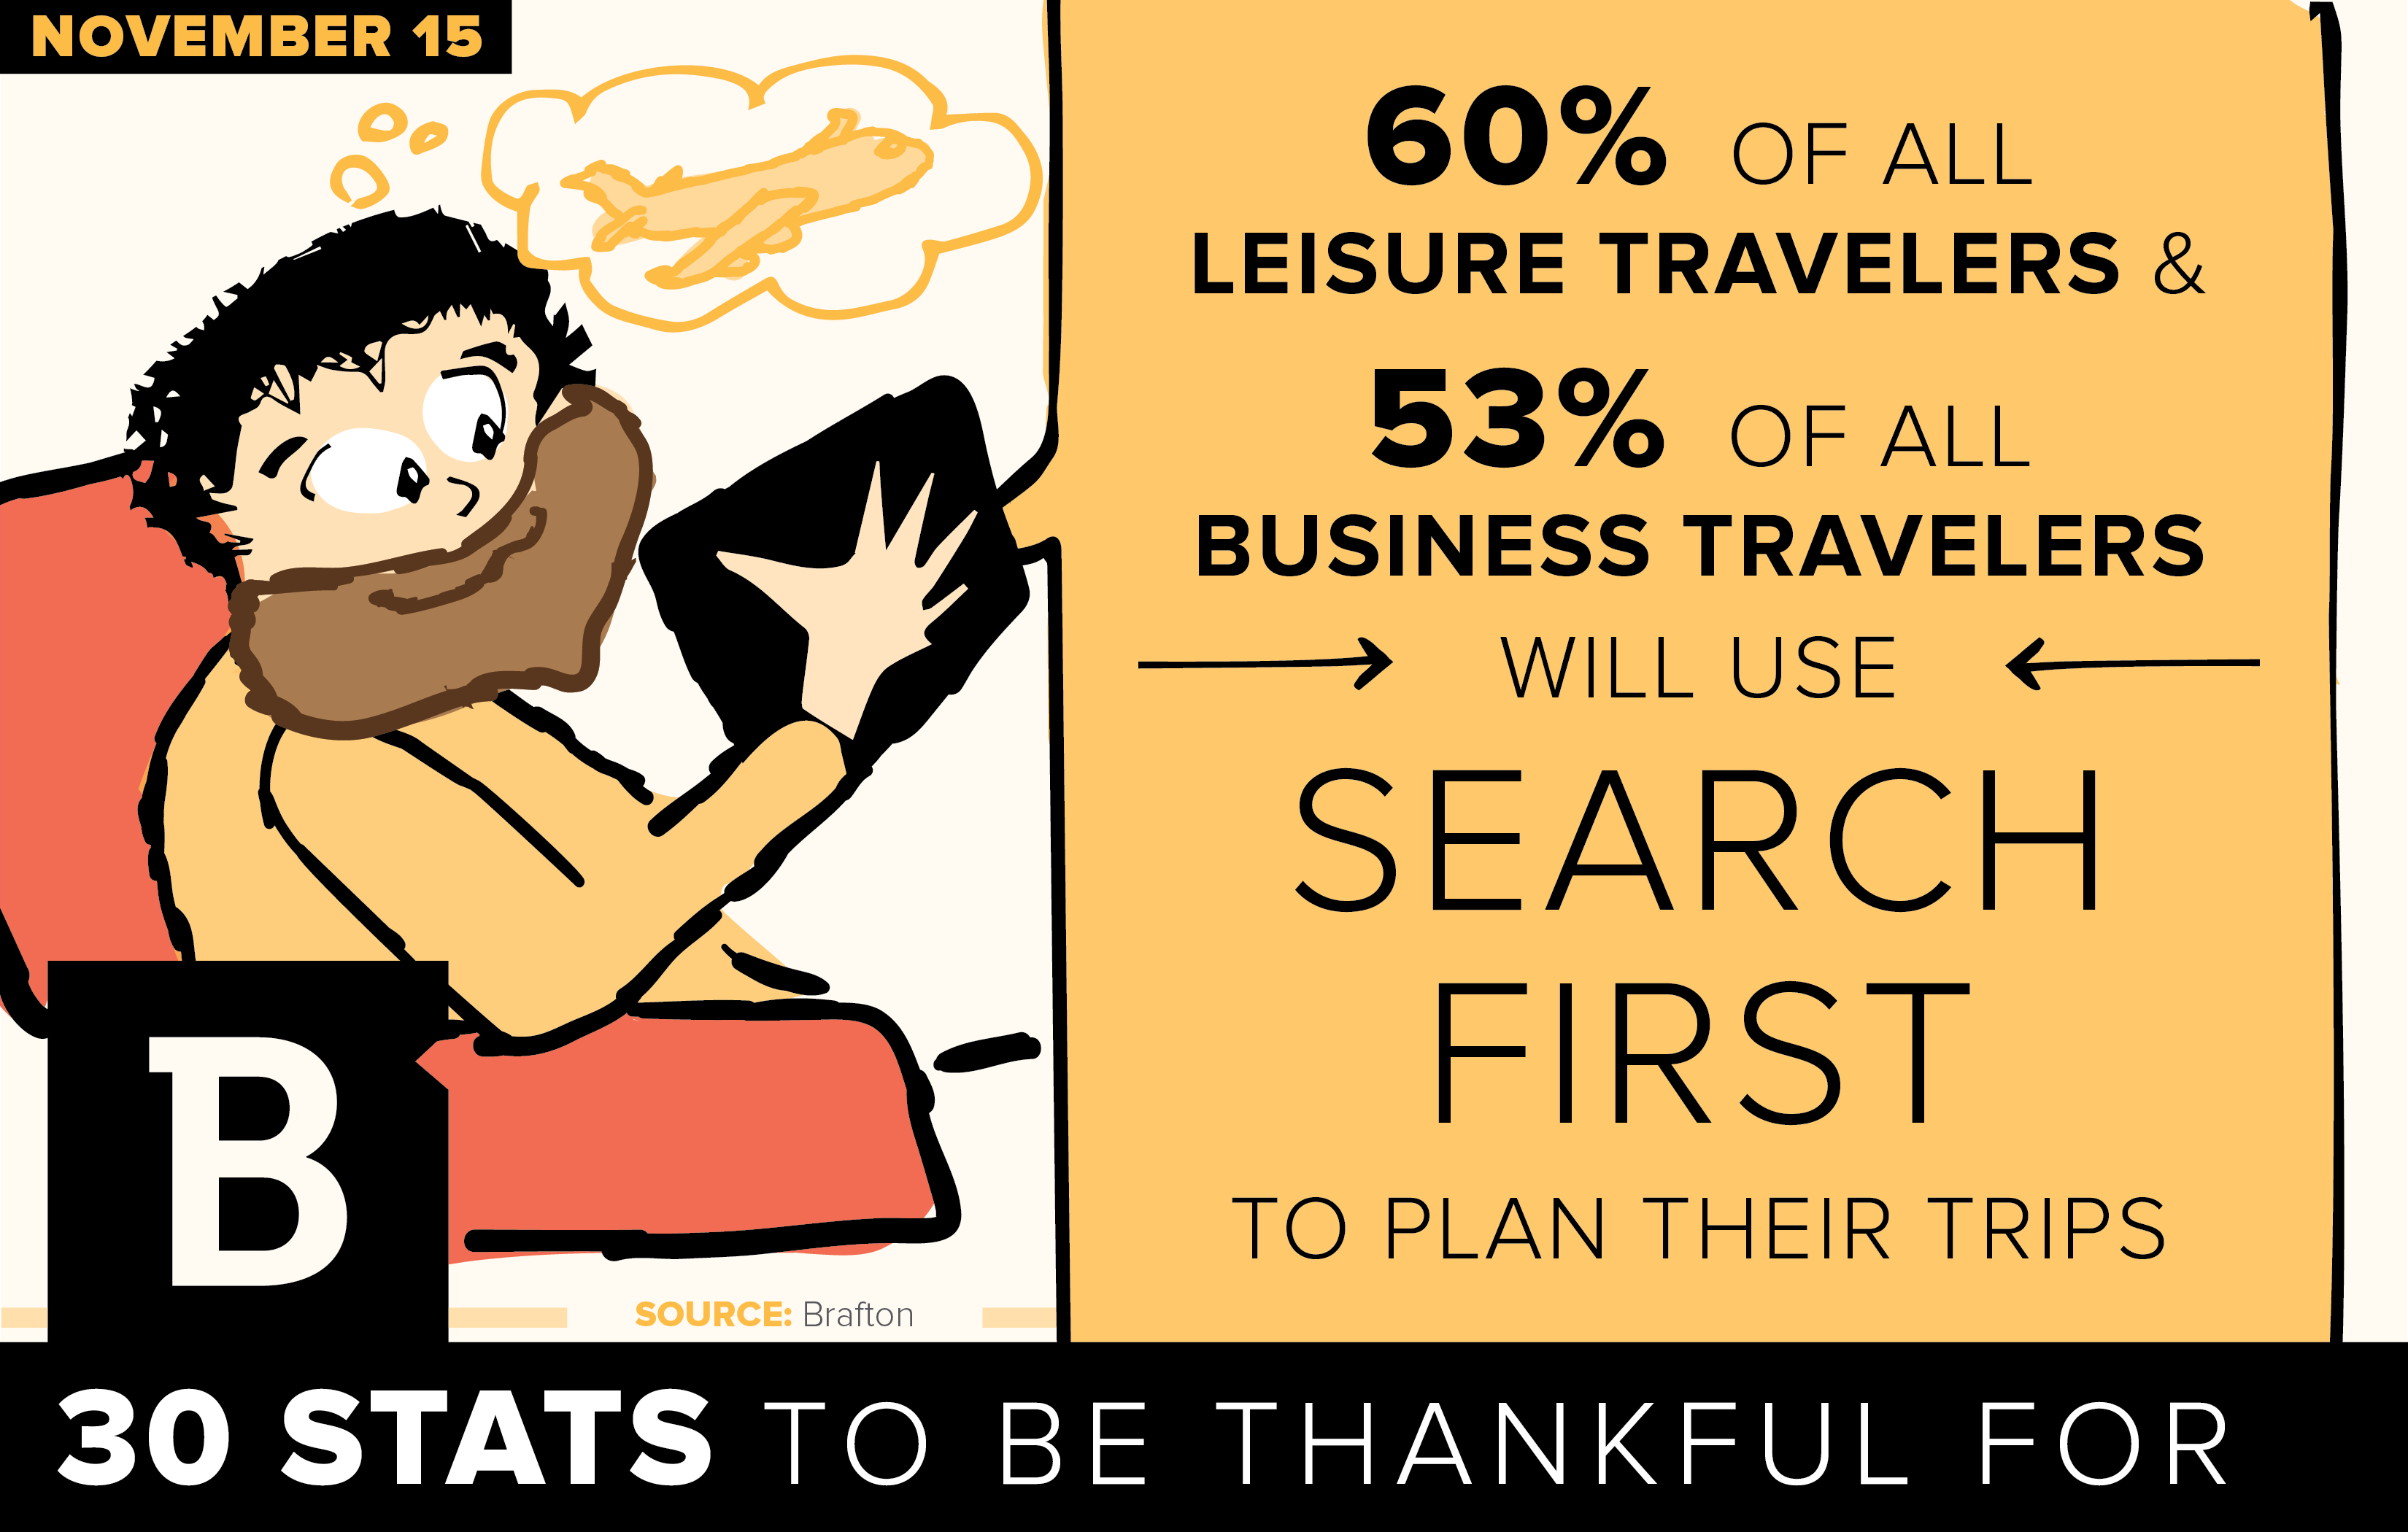 A study found that more consumers are booking travel accommodations online.